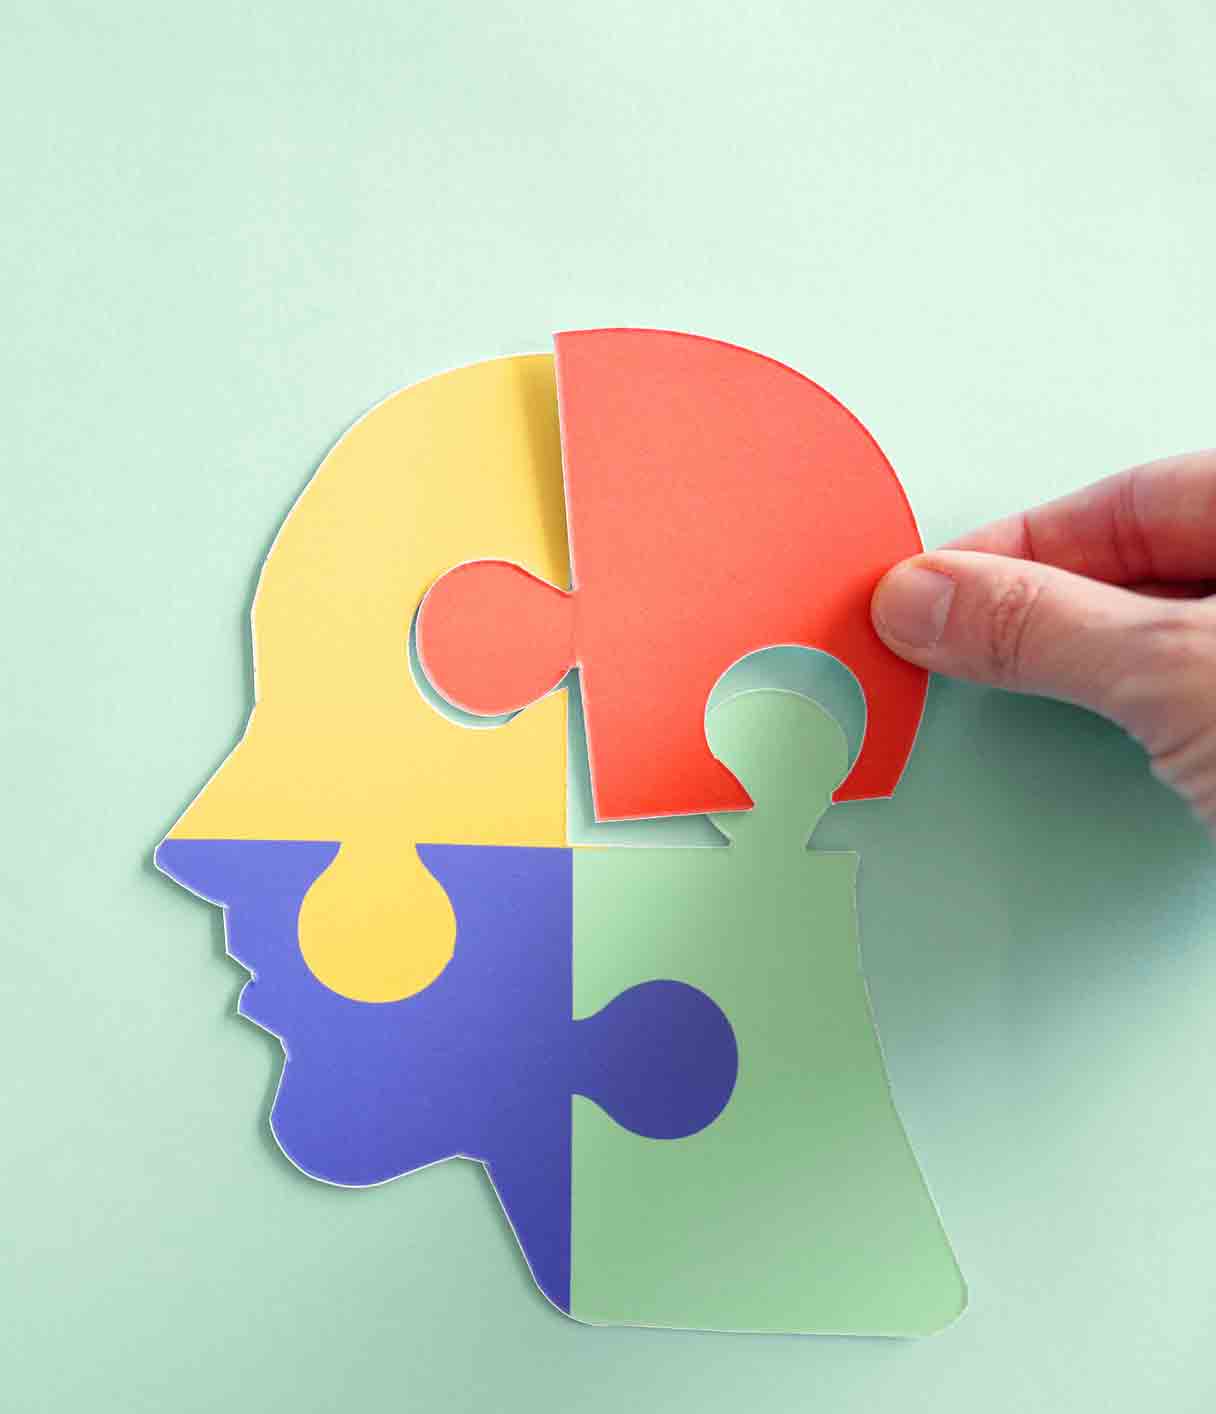 Mental health spectrum depicted in a head shape with different colored puzzle pieces